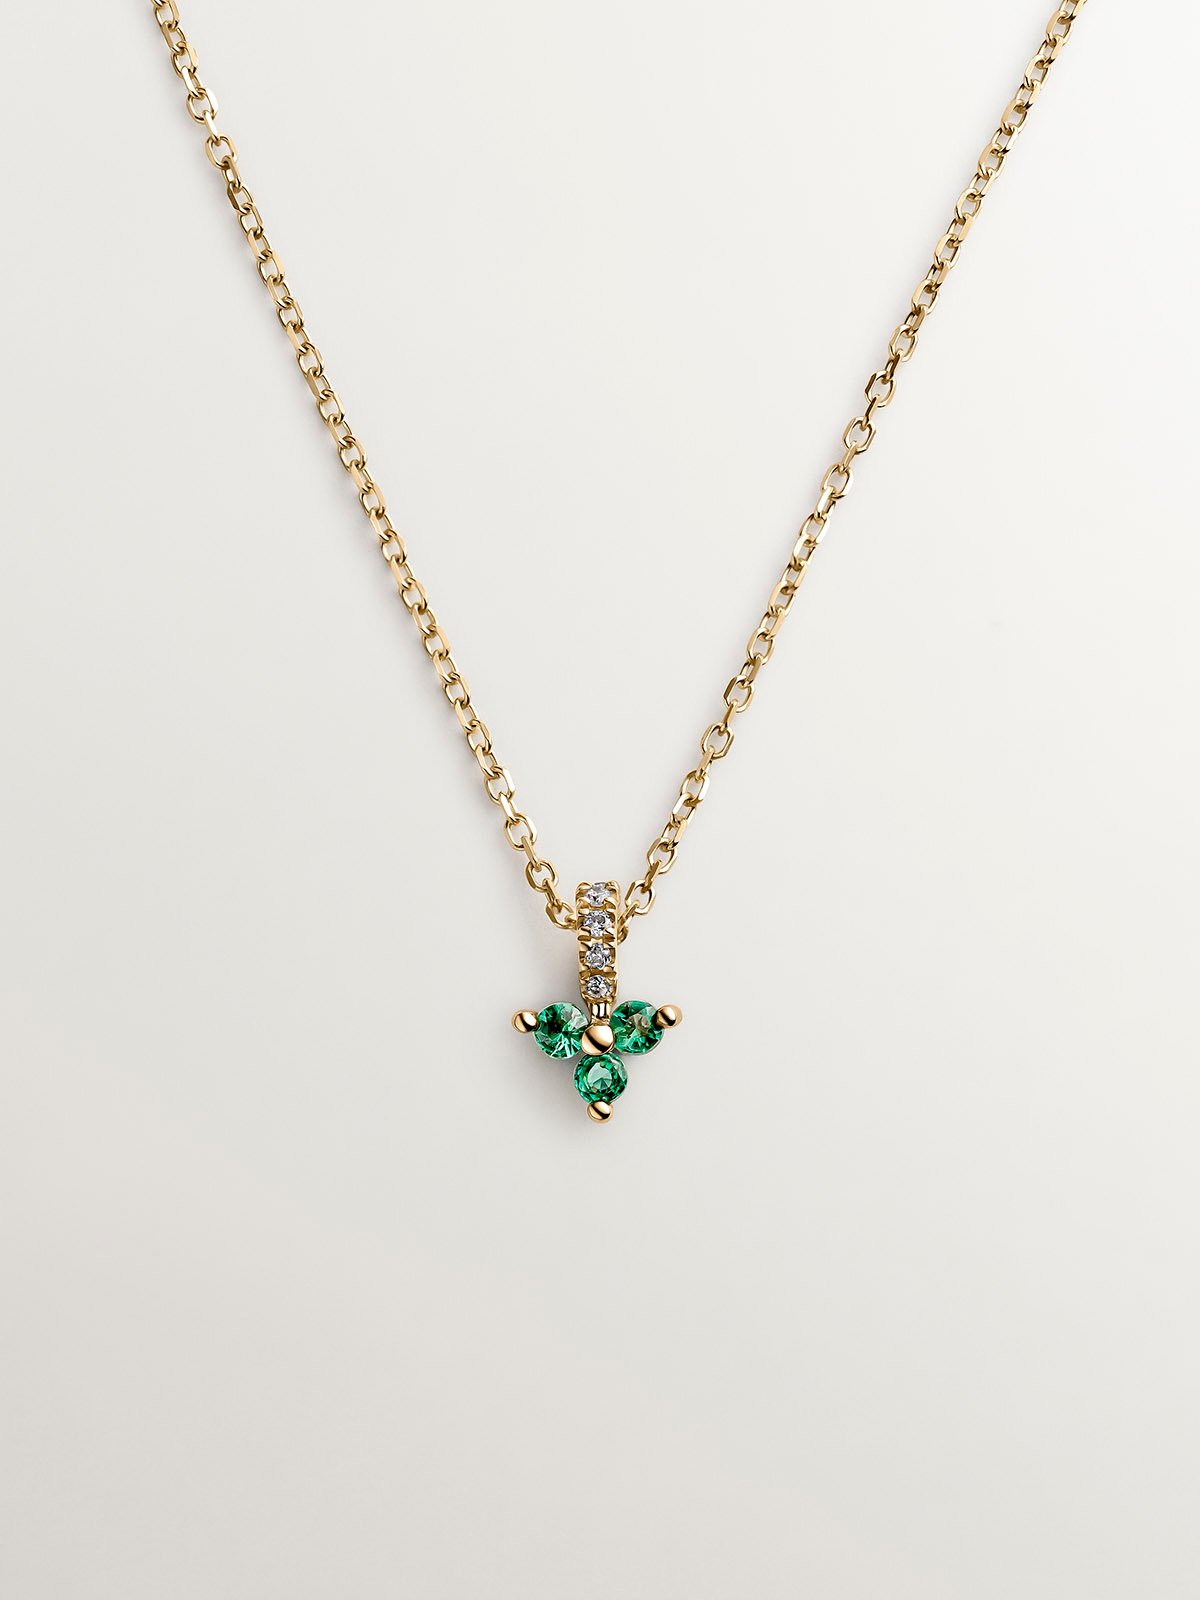 9K yellow gold pendant with emerald and diamond clover